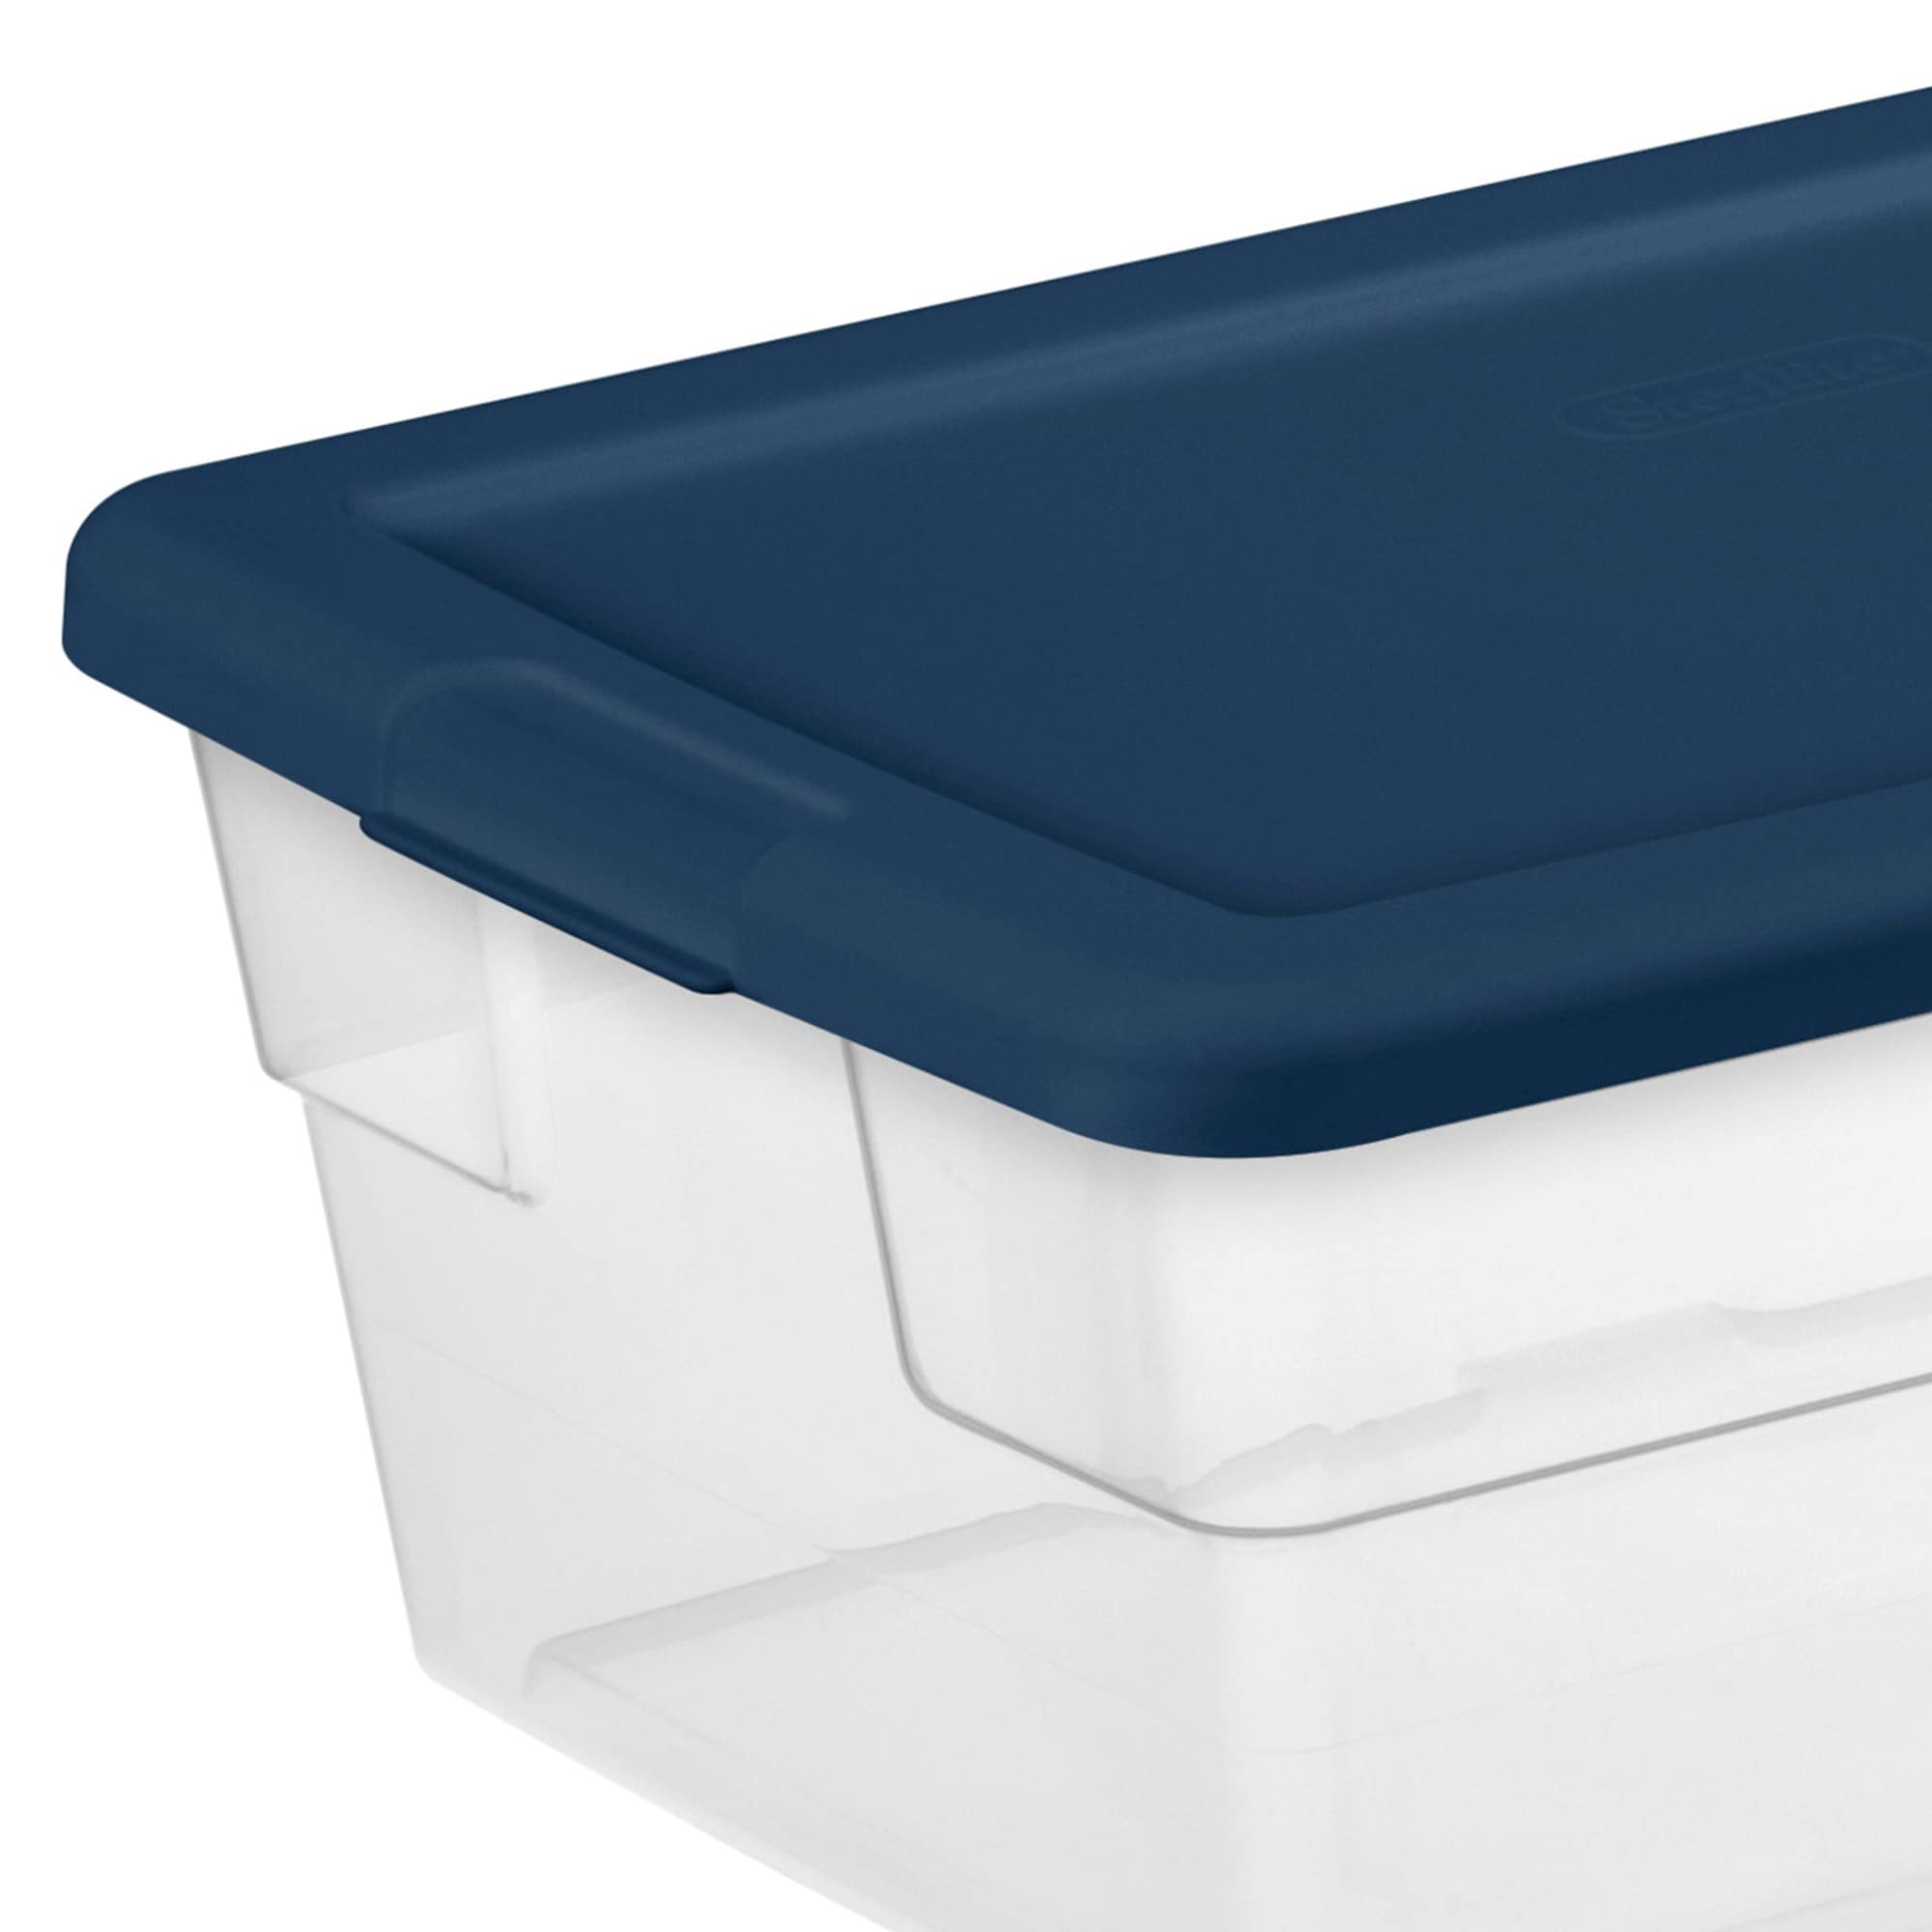 https://ak1.ostkcdn.com/images/products/is/images/direct/1aa599359c2c42895eb3454f1f124a2c6d61478e/Sterilite-Stackable-6-Qt-Storage-Box-Container%2C-Clear%2C-Marine-Blue-Lid-%2830-Pack%29.jpg